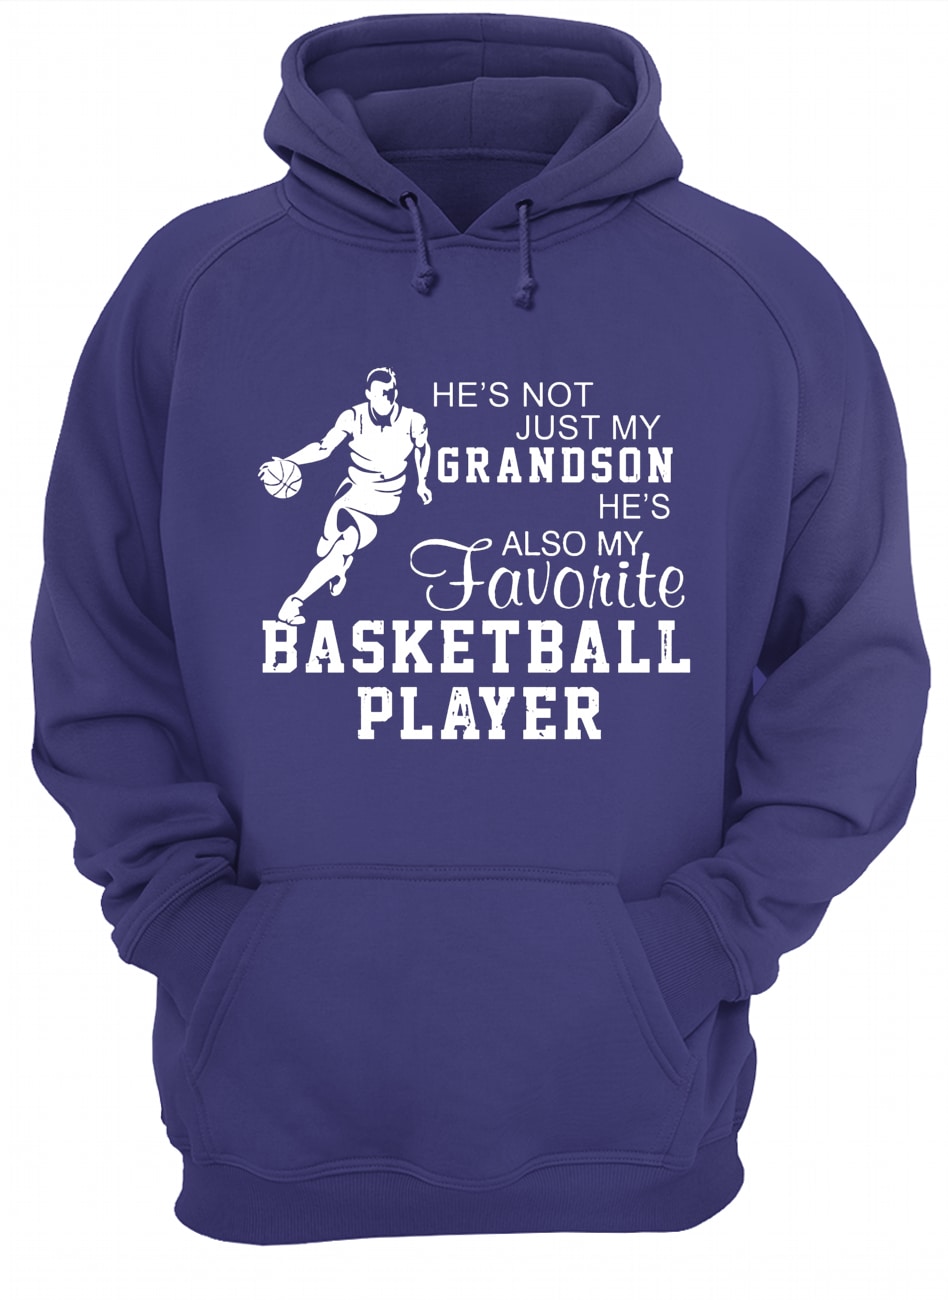 He's not just my grandson he's also my favorite basketball player hoodie